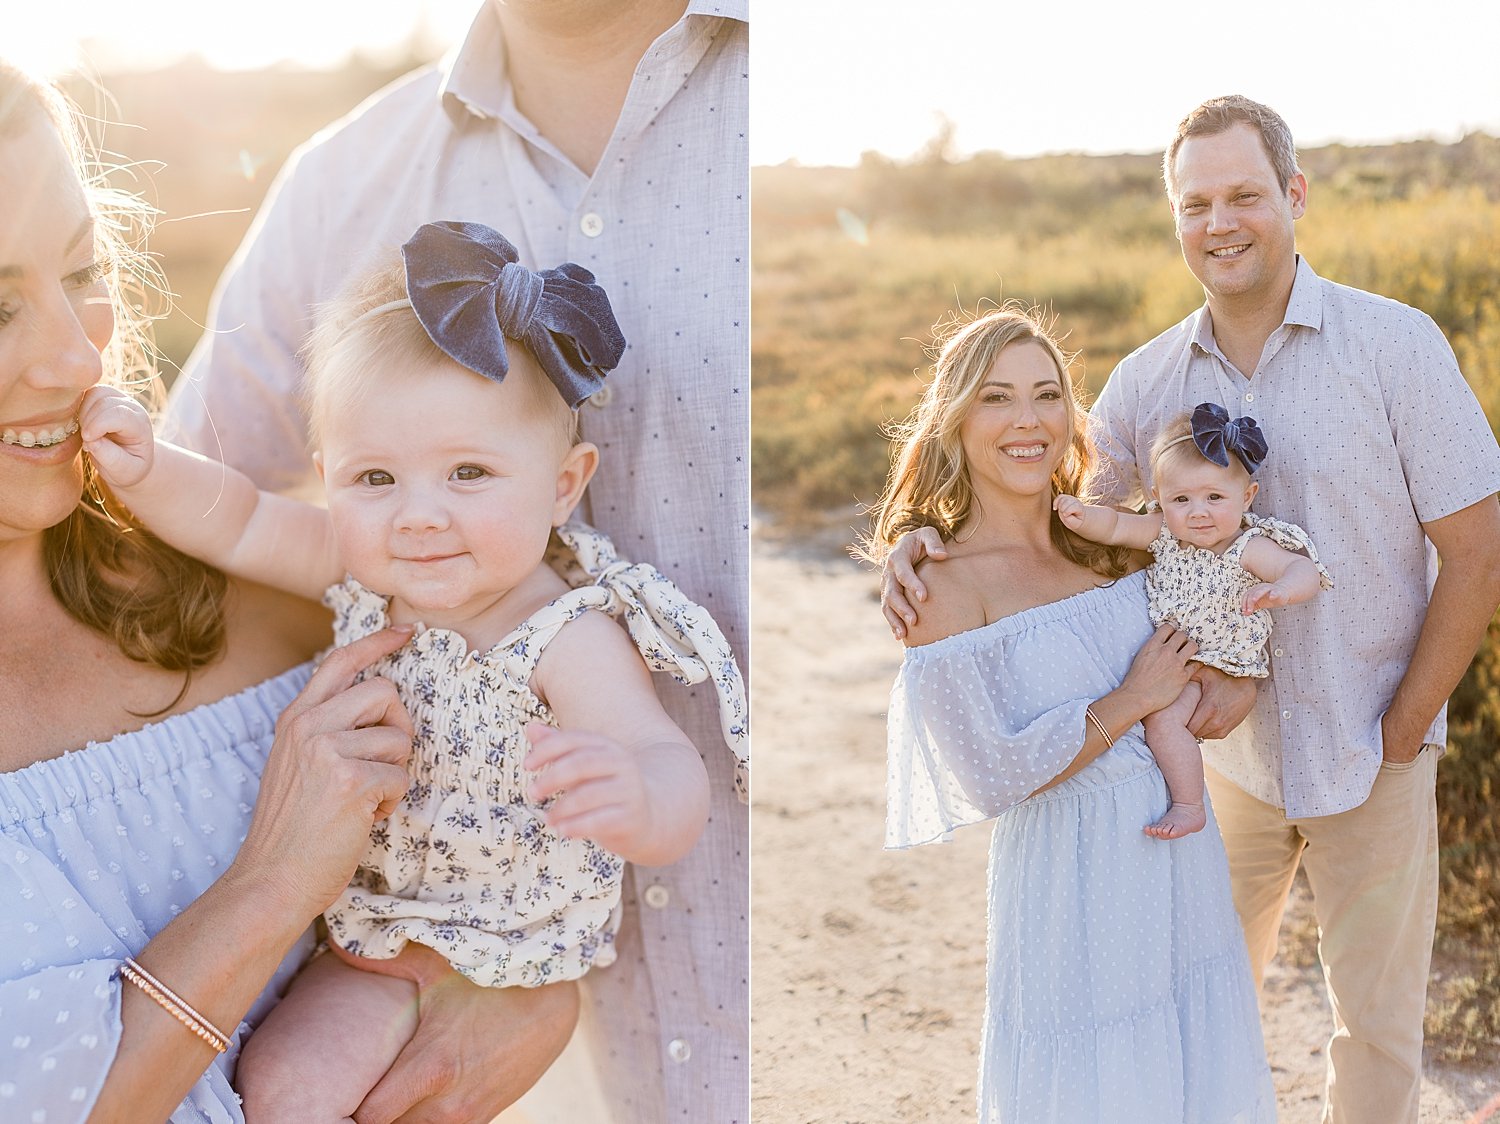 Outdoor family session at golden hour with Ambre Williams Photogrpahy.